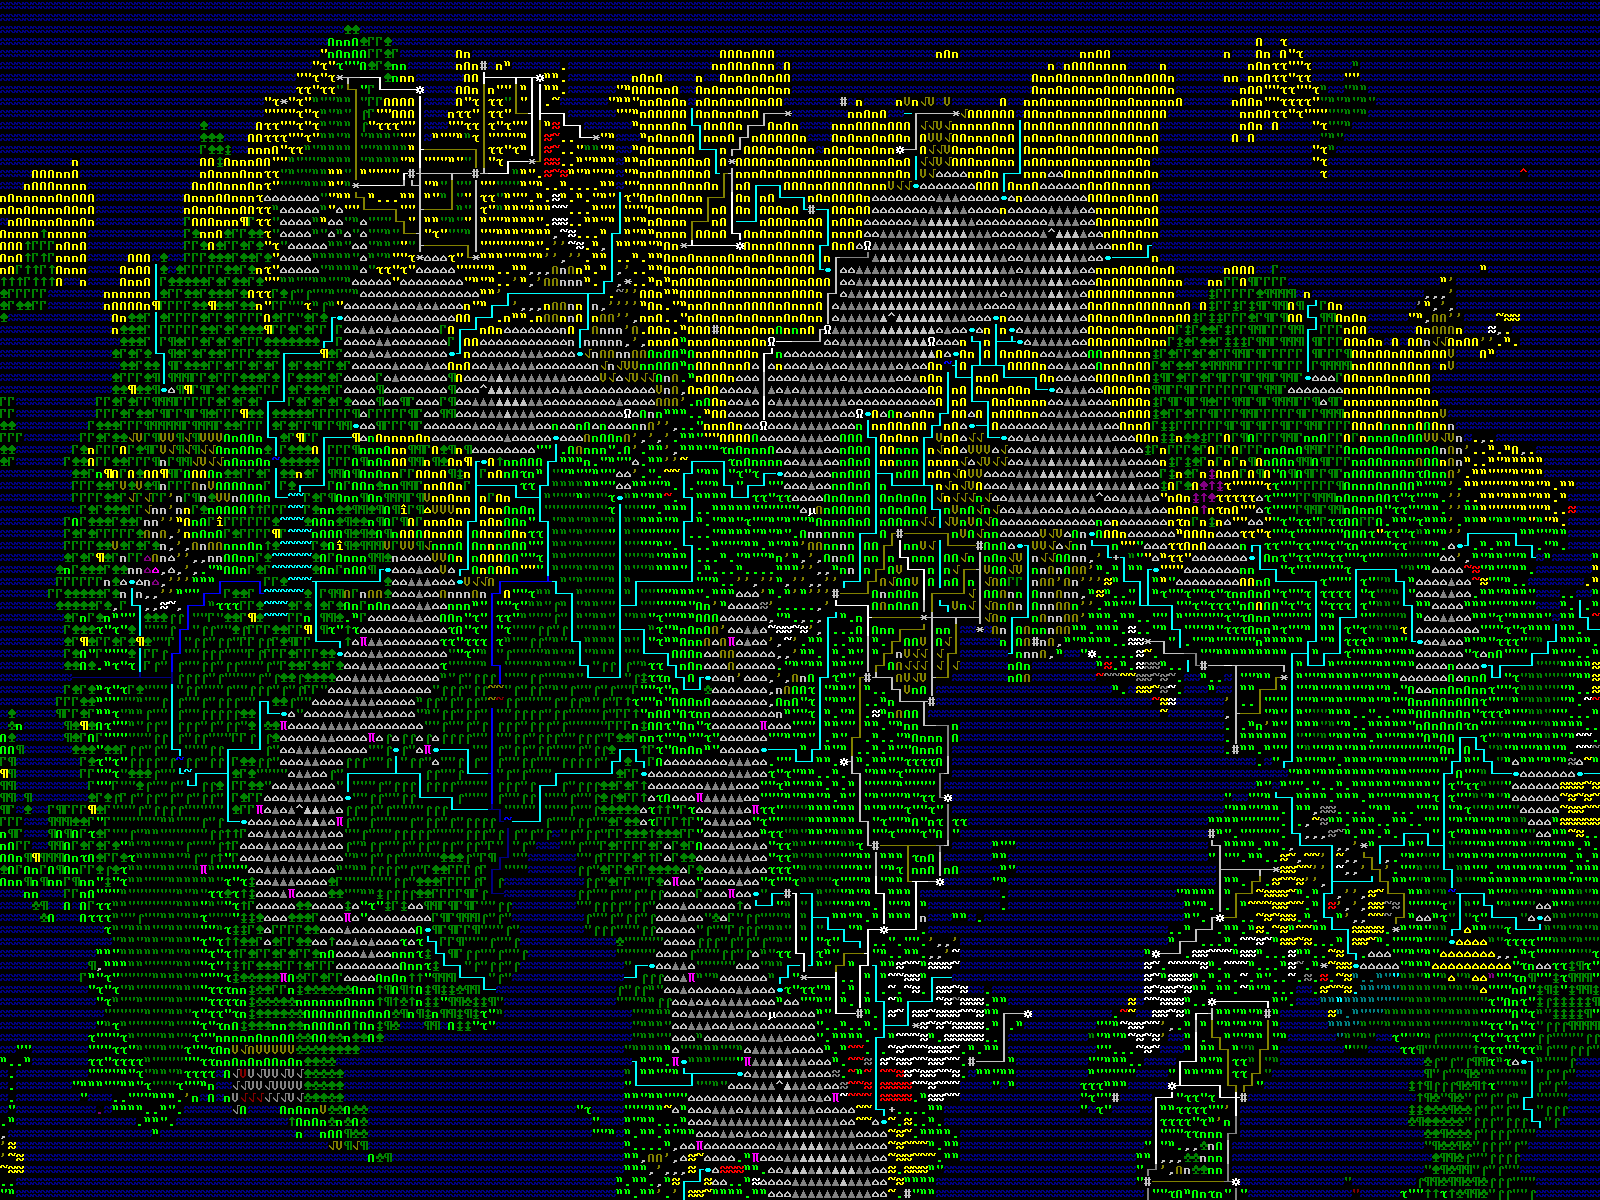 dwarf fortress trading with liason